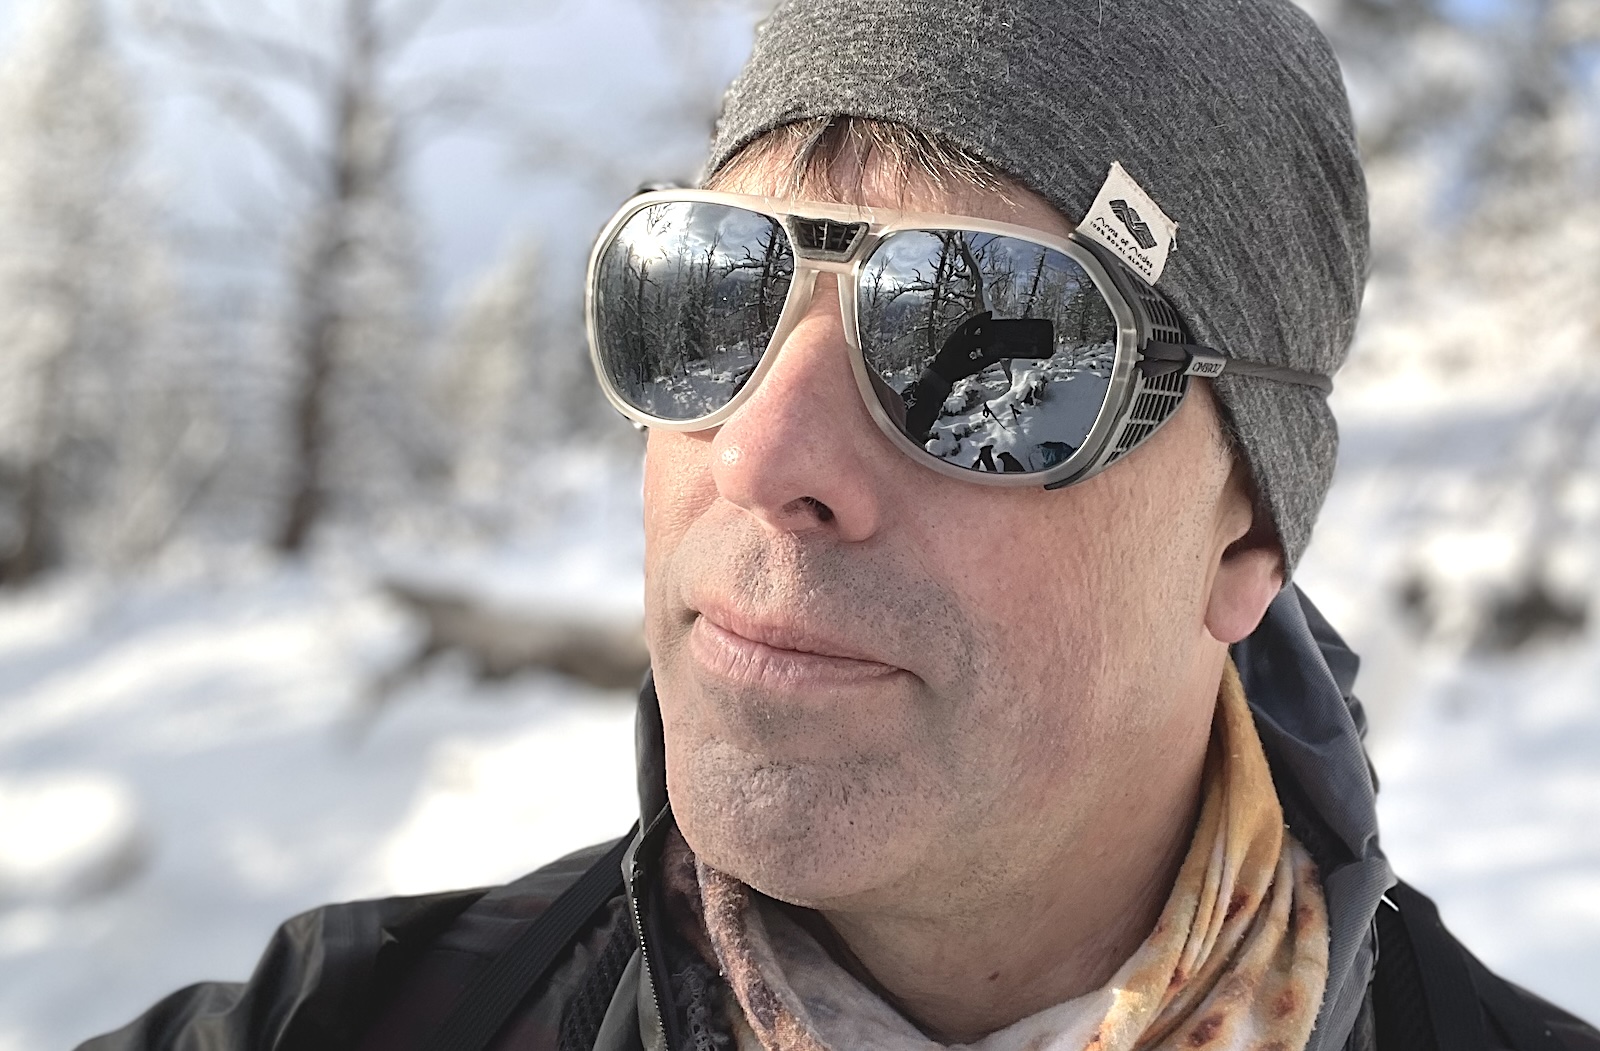 a man wearing sunglasses and a hat in the snow